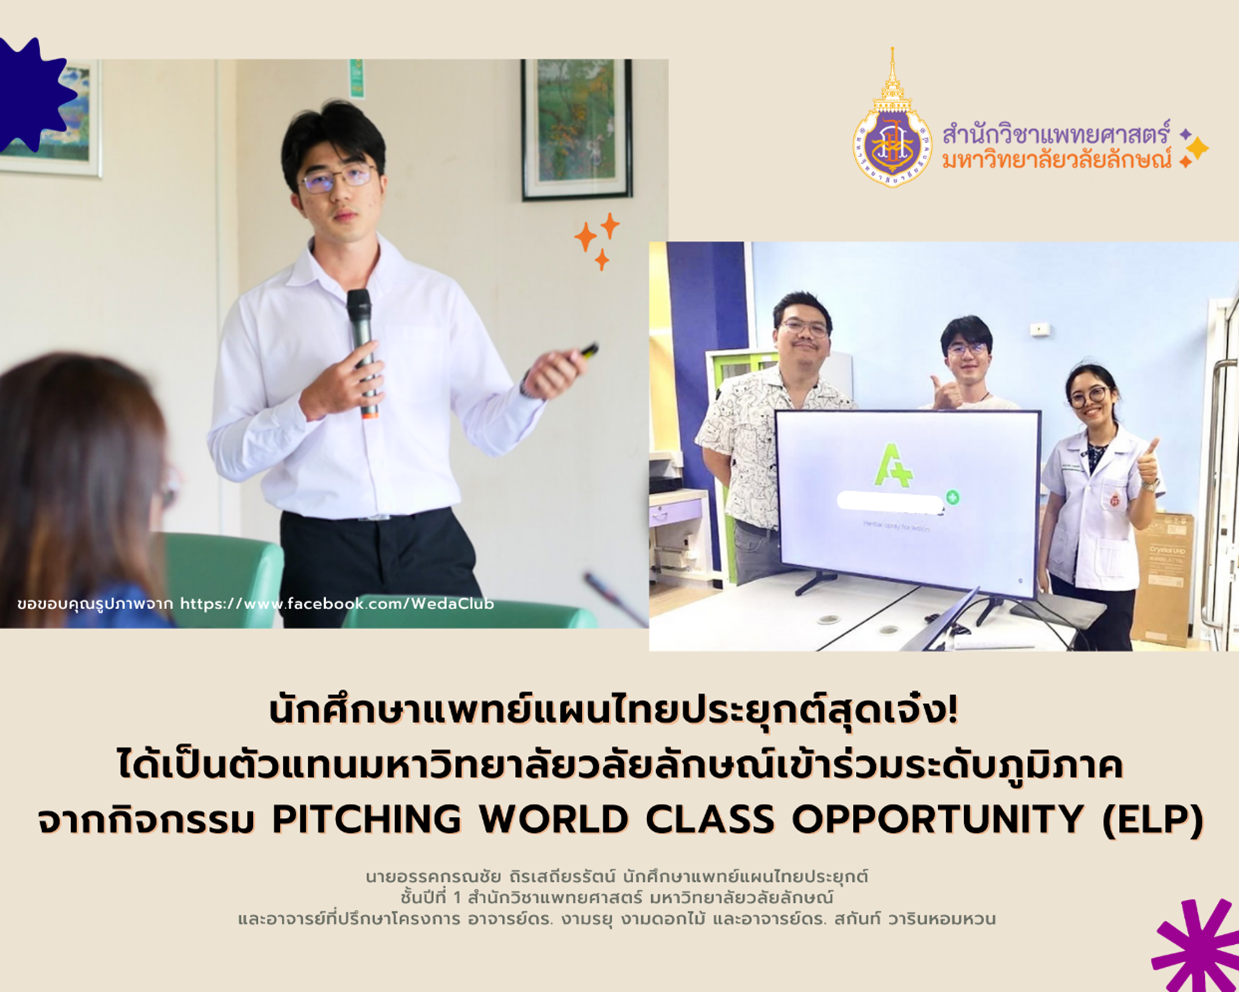 Congratulations to the Applied Thai Traditional Medicine students! Represented Walailak University to participate at the regional level from Pitching World Class Opportunity (ELP)